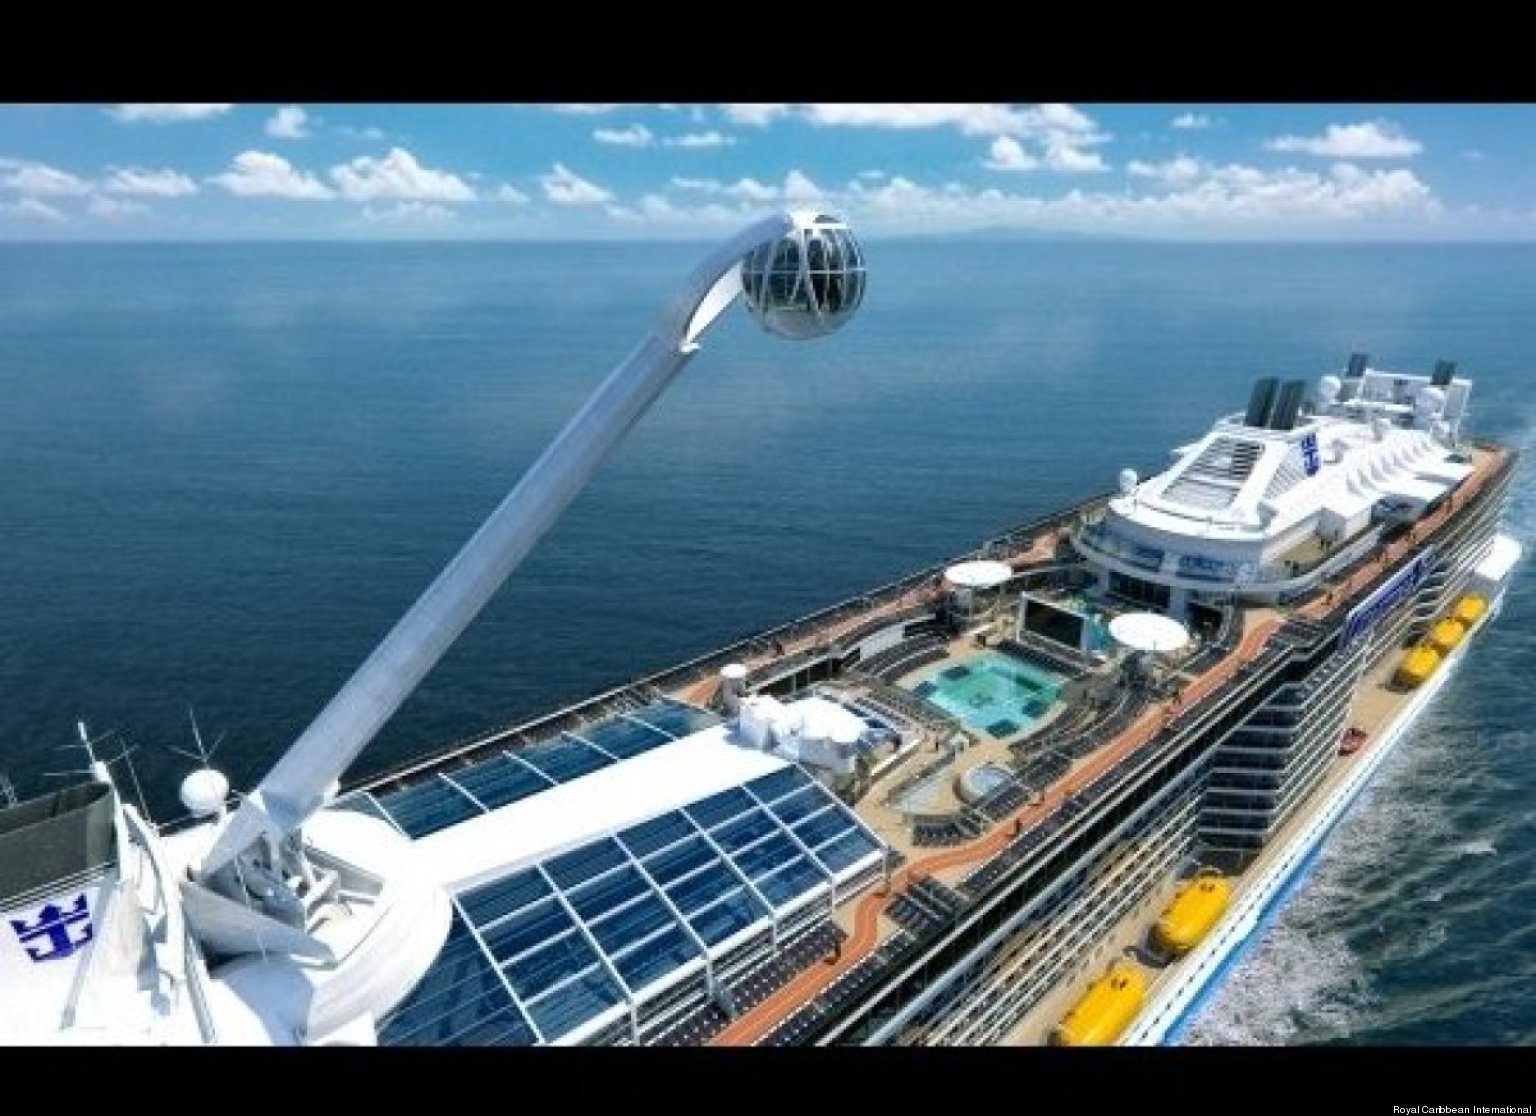 Quantum Of The Seas' New Thrills At Sea | HuffPost